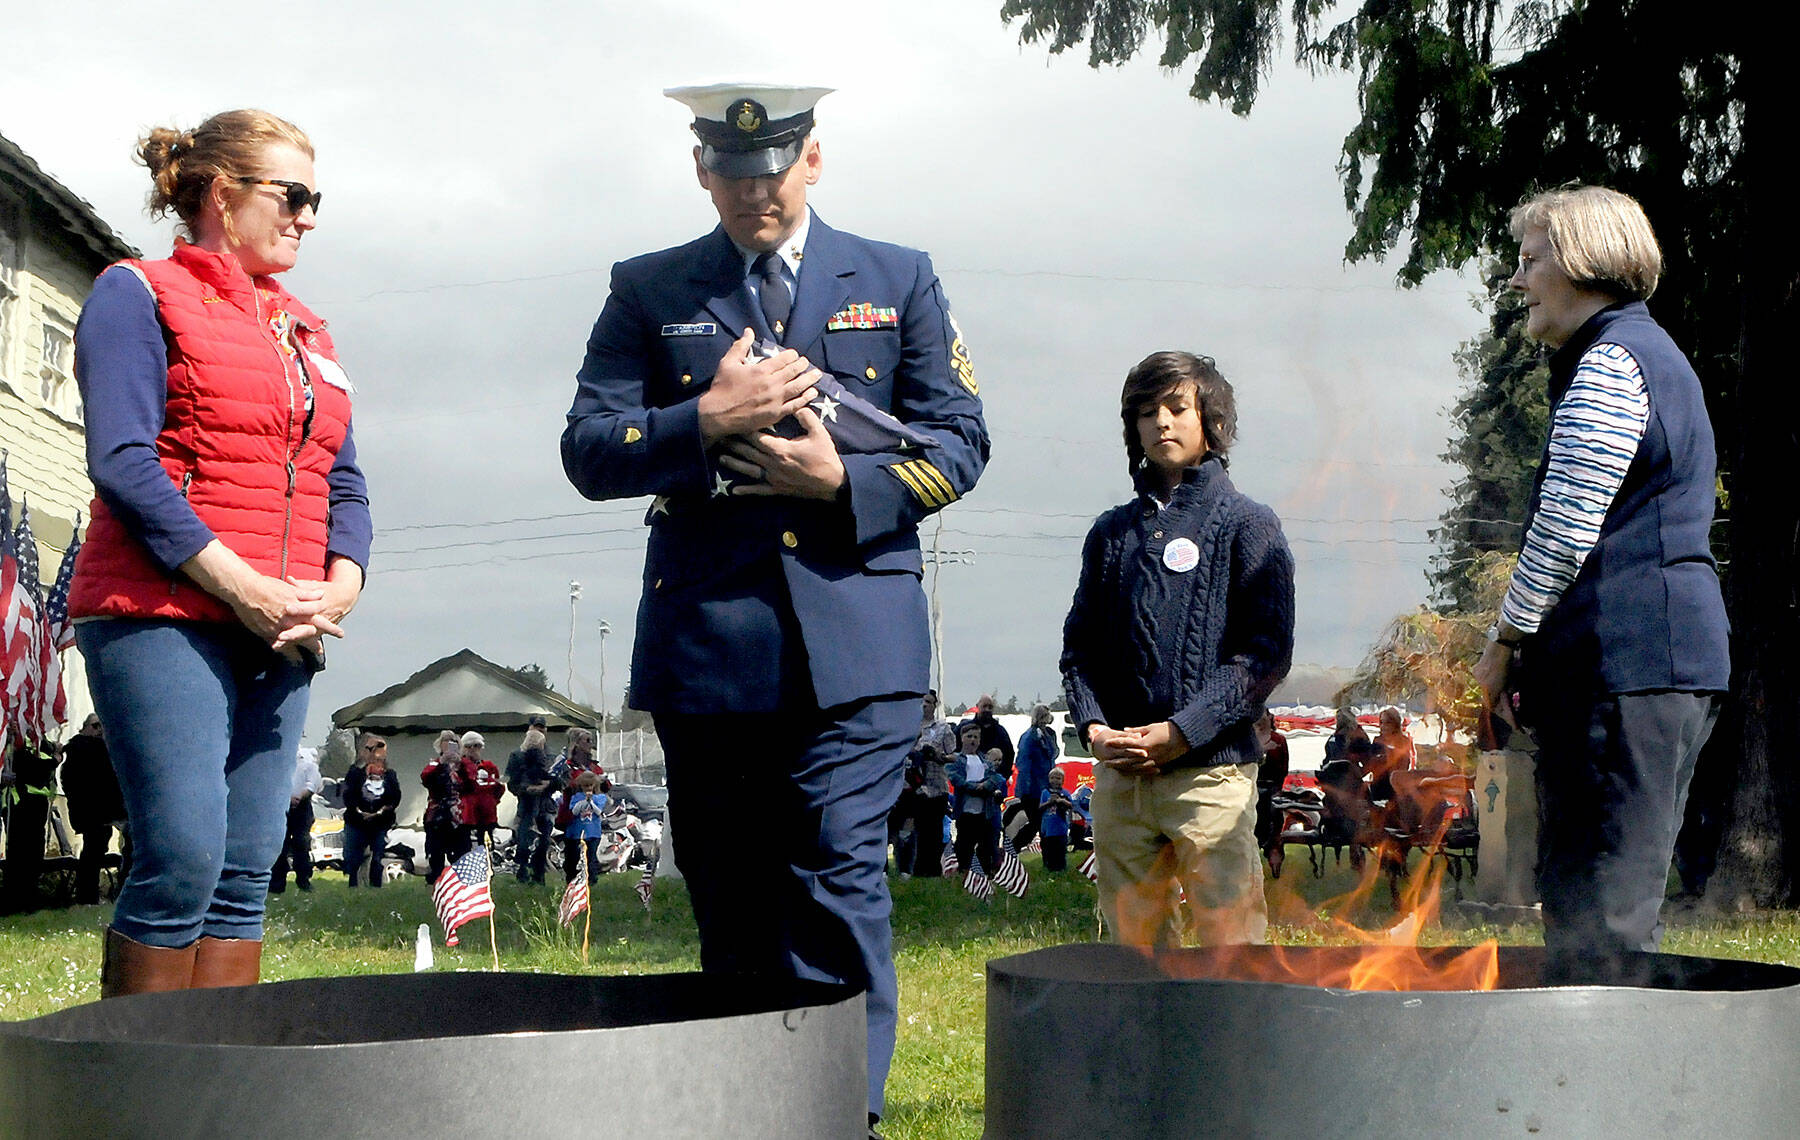 U.S. Coast Guard Chief Petty Officer Shane Thompson, accompanied by his son, Malachi Thompson, 10, a member Junior American Citizens, carries a used flag for incineration on June 14 at the Northwest Veterans Service Center in Port Angeles on Flag Day. Overseeing the burning were Ginny Sturgeon, left, and Jan Urfer, right, members of the Michael Trebert chapter of the Daughters of the American Revolution, which co-hosted the event with the Clallam County Veterans Association. Eleven used cotton flags were burned during Tuesday’s Flag Retirement Ceremony. Photo by Keith Thorpe/Olympic Peninsula News Group